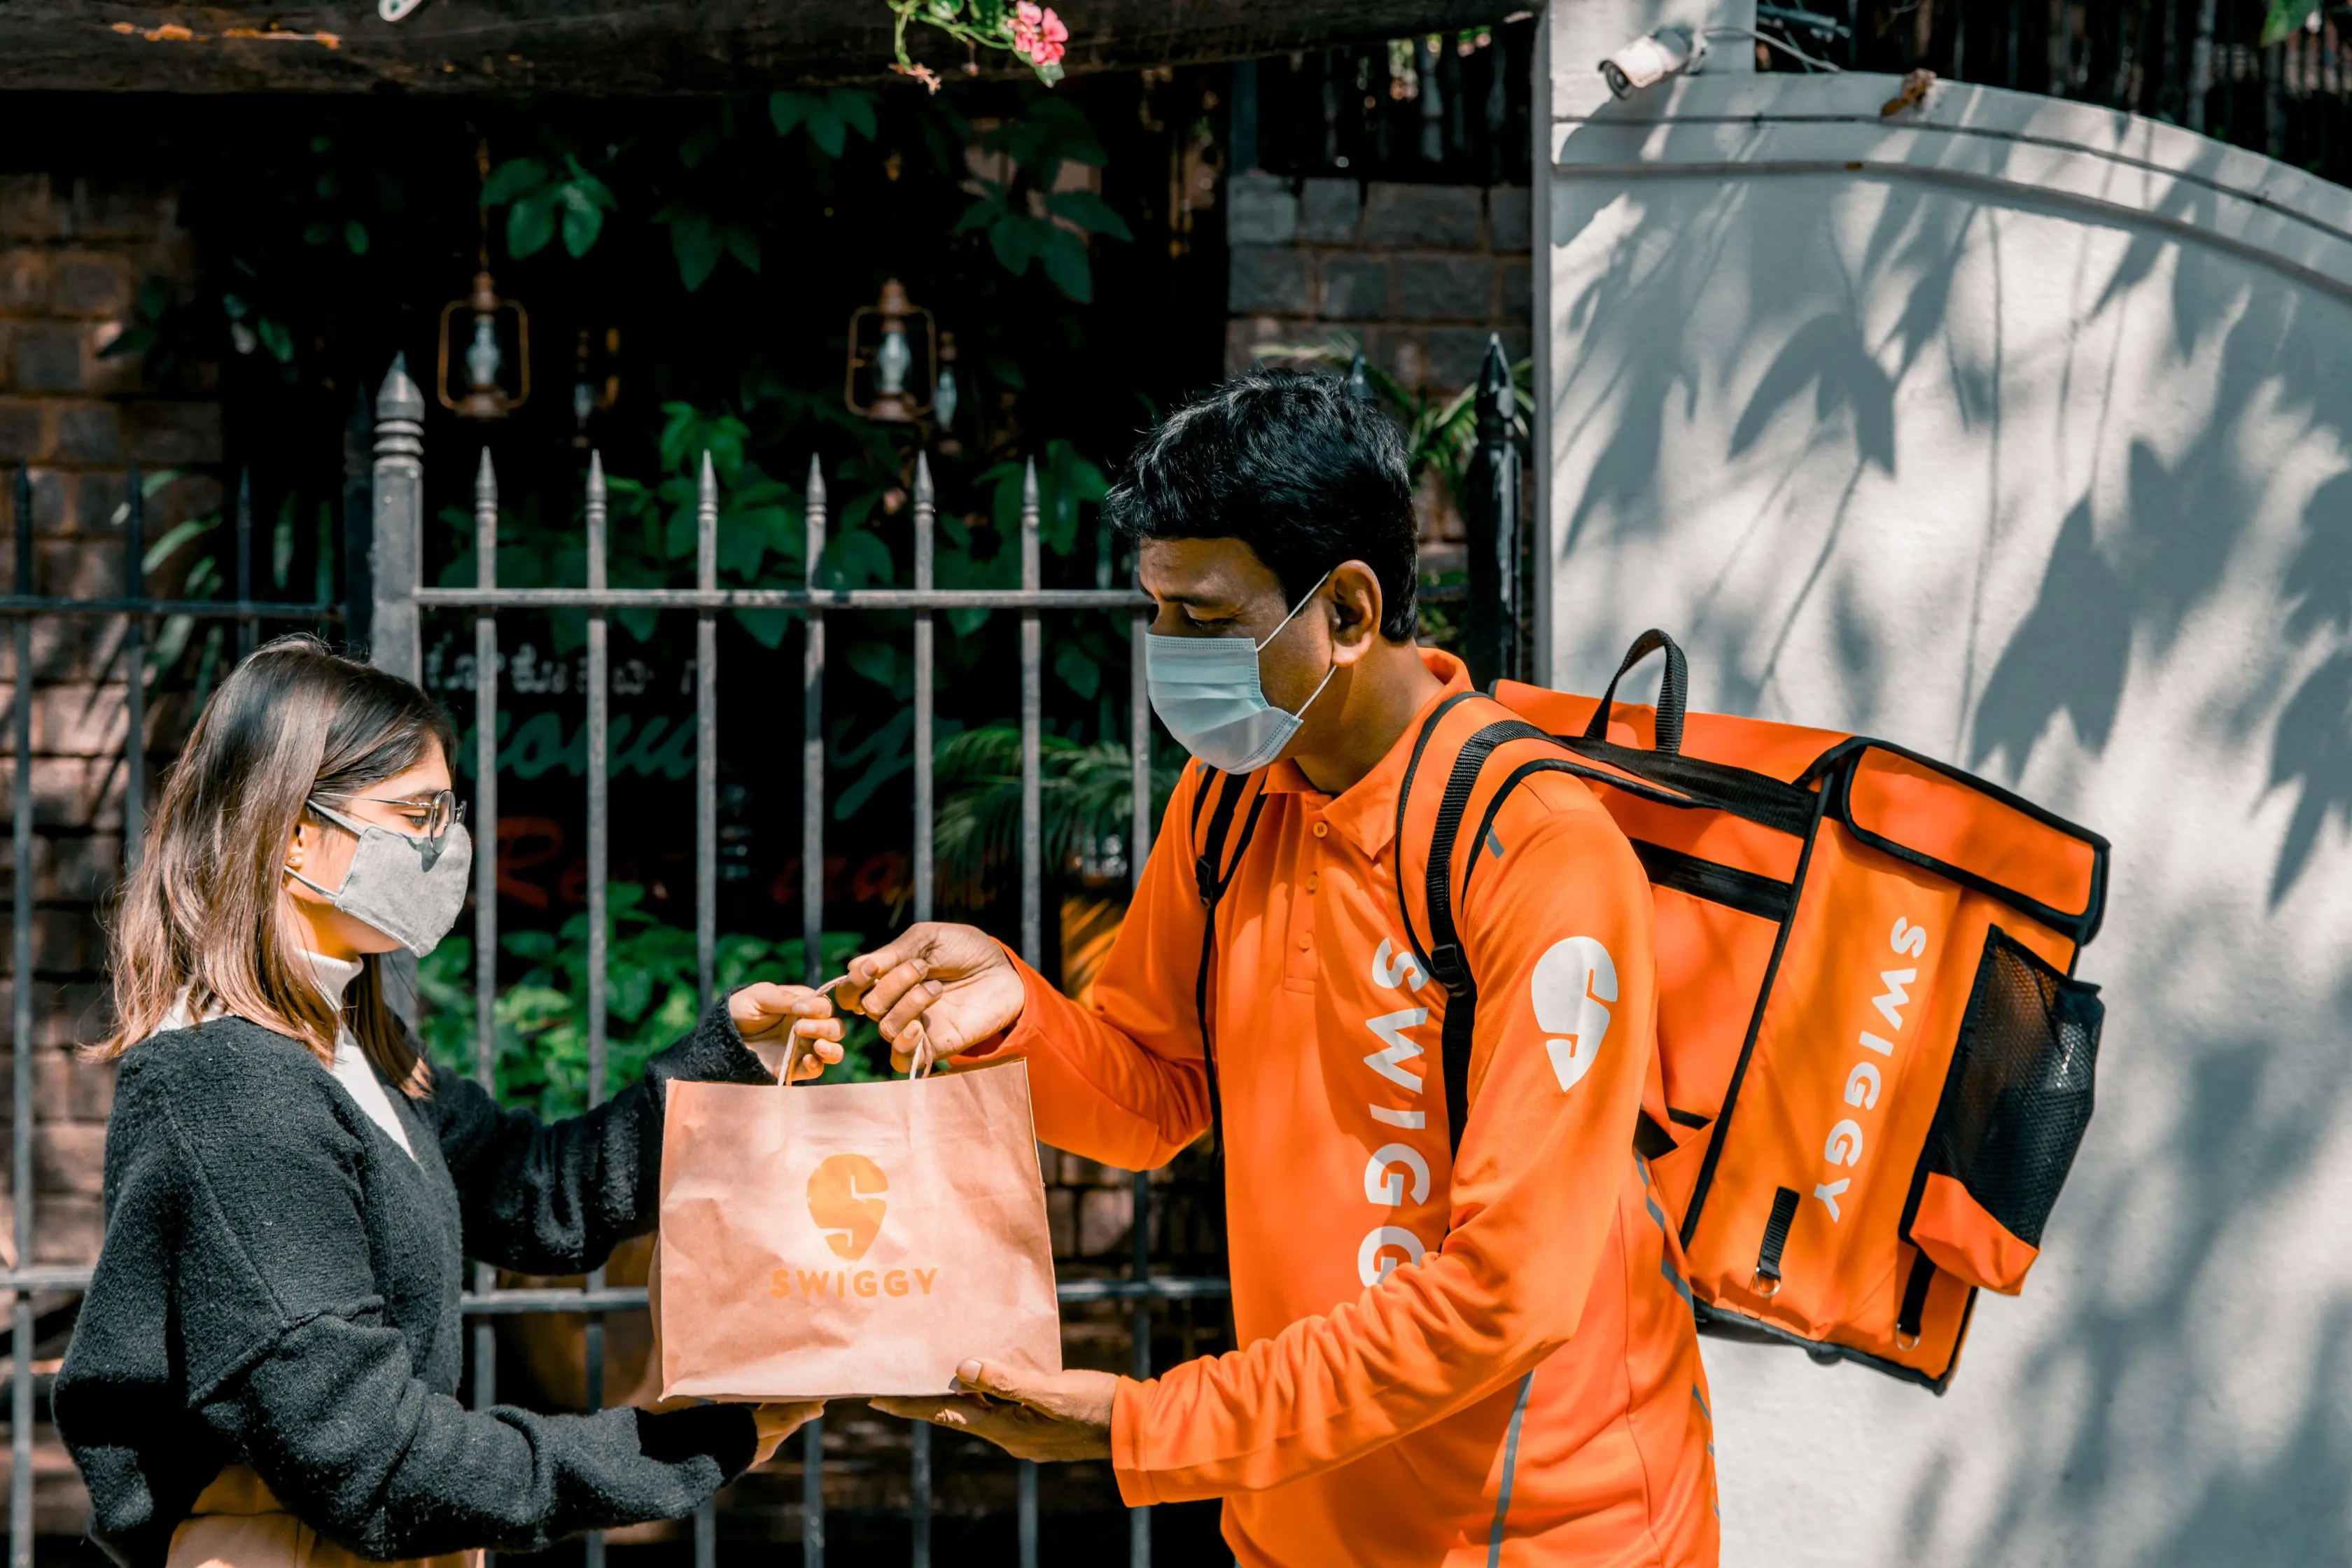 Swiggy gets shareholder nod for IPO: Reports